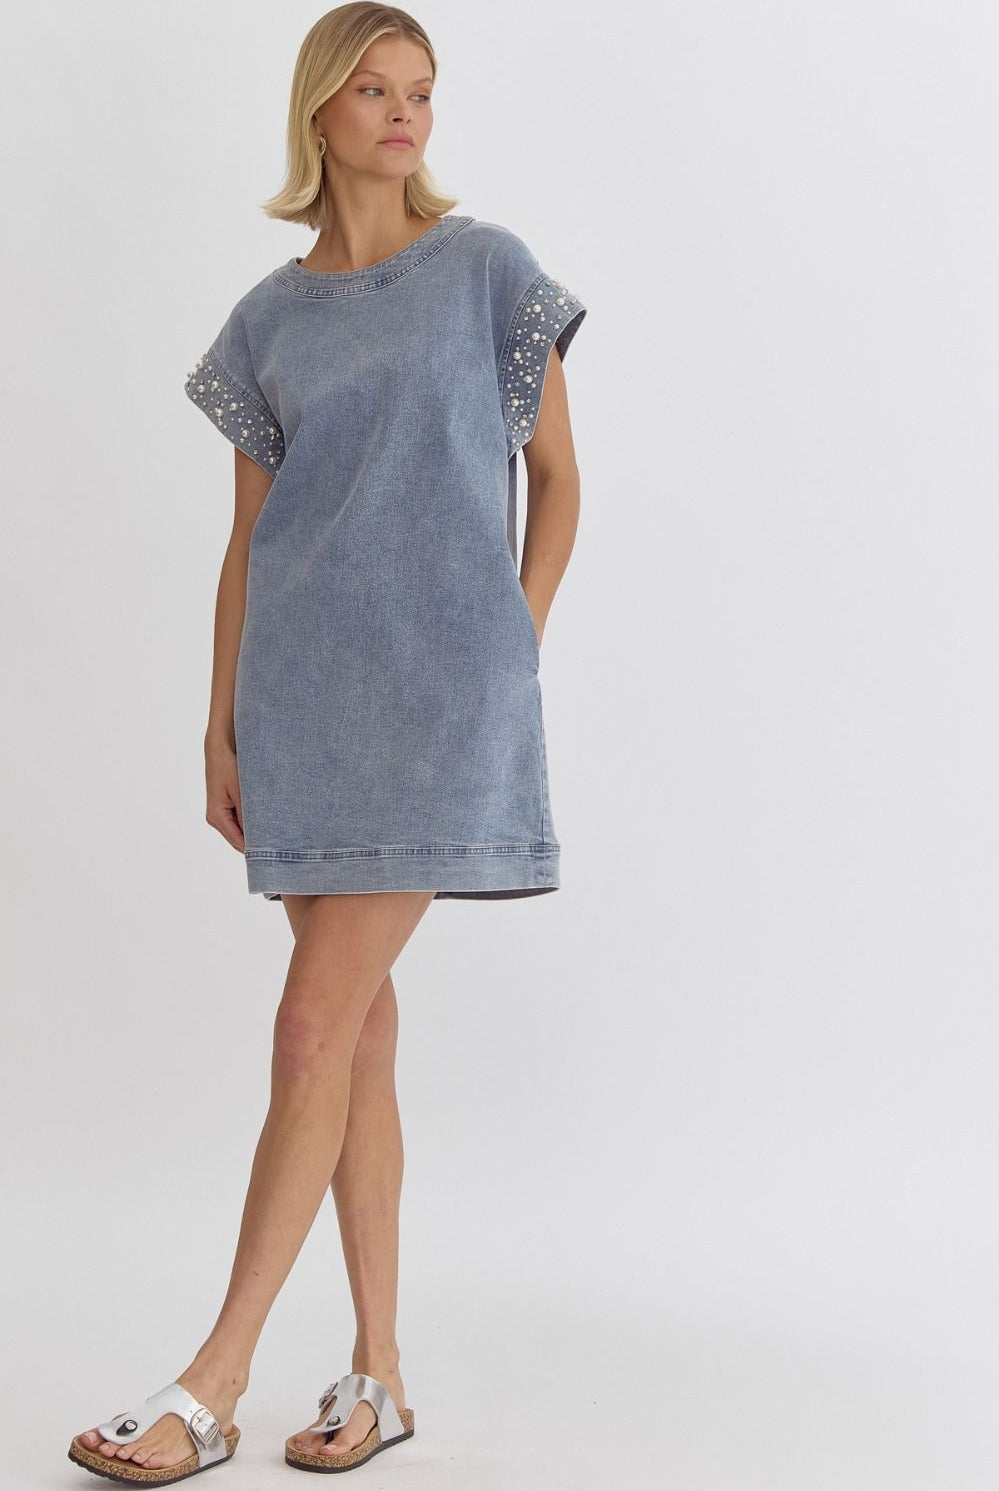 Penny Round Neck Pearl Embellished Denim Dress - Be You Boutique